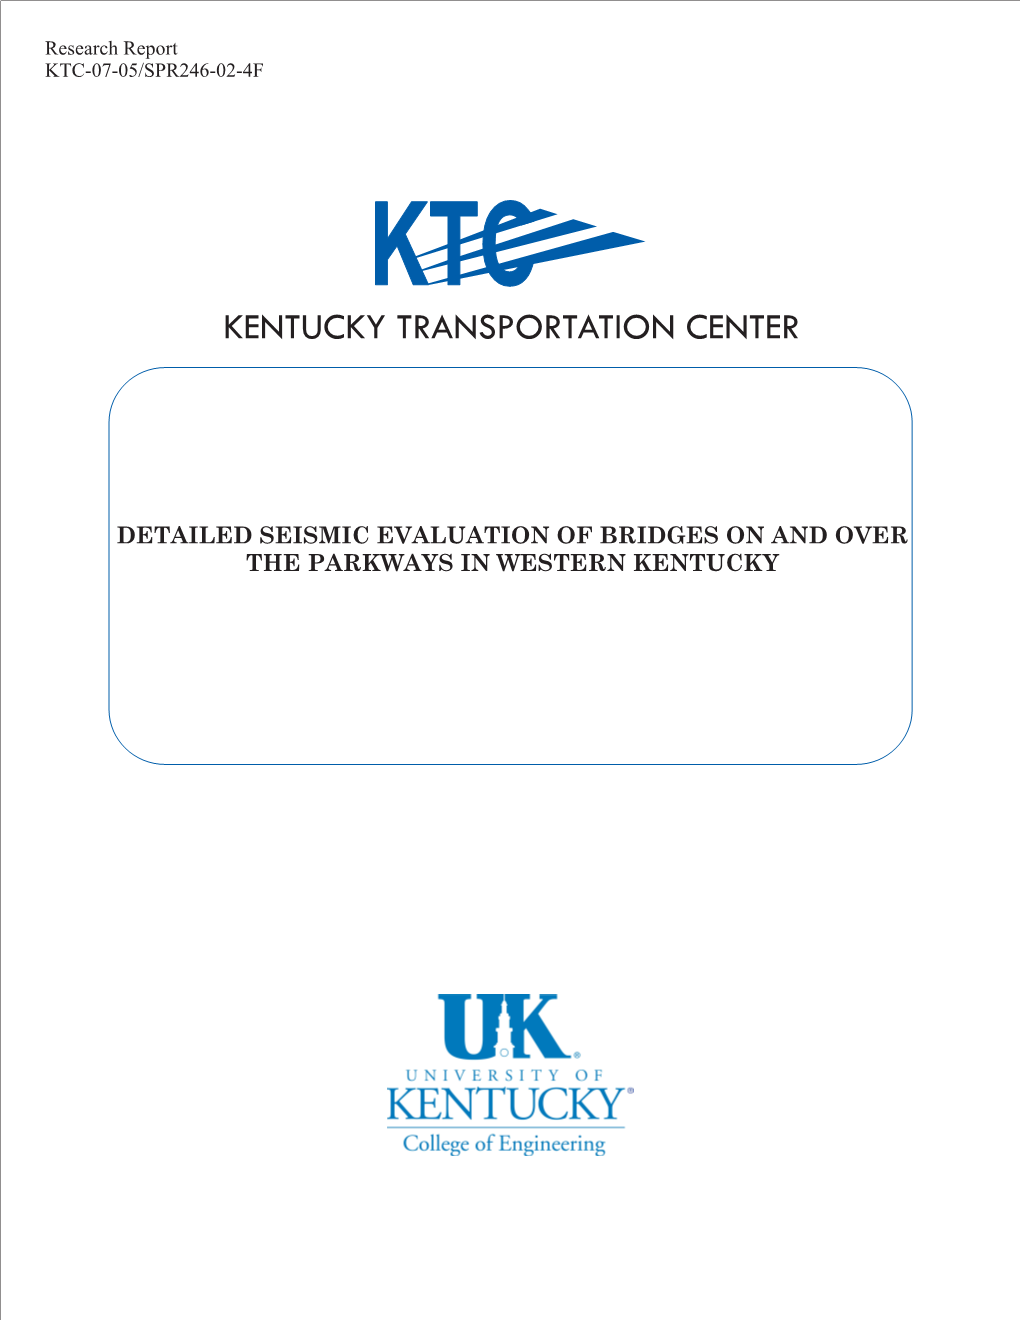 Detailed Seismic Evaluation of Bridges on and Over the Parkways in Western Kentucky Our Mission